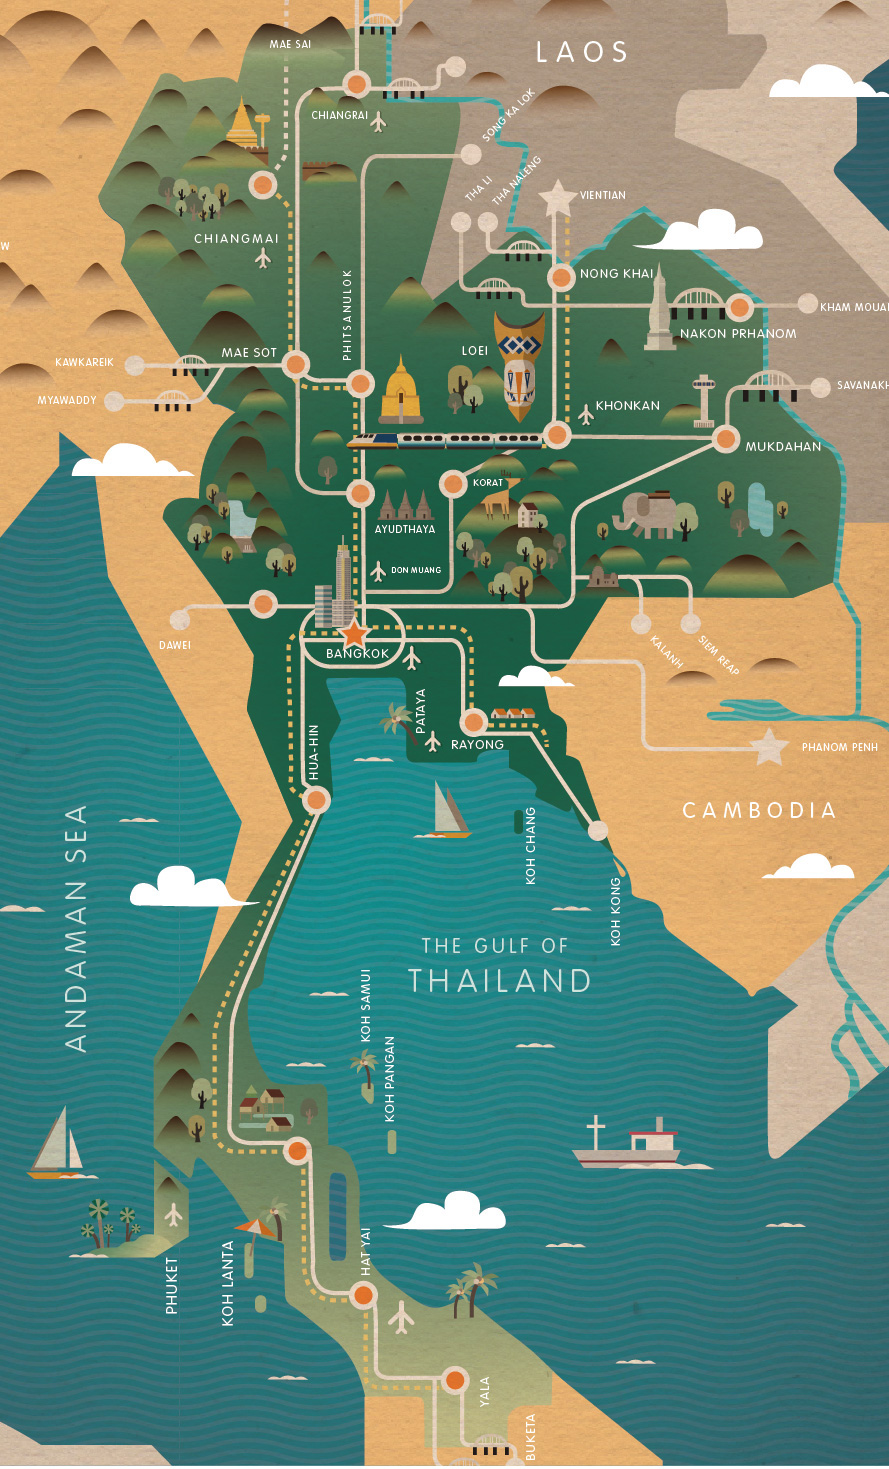 Thailand map ASEAN Monocle vector asia infographic